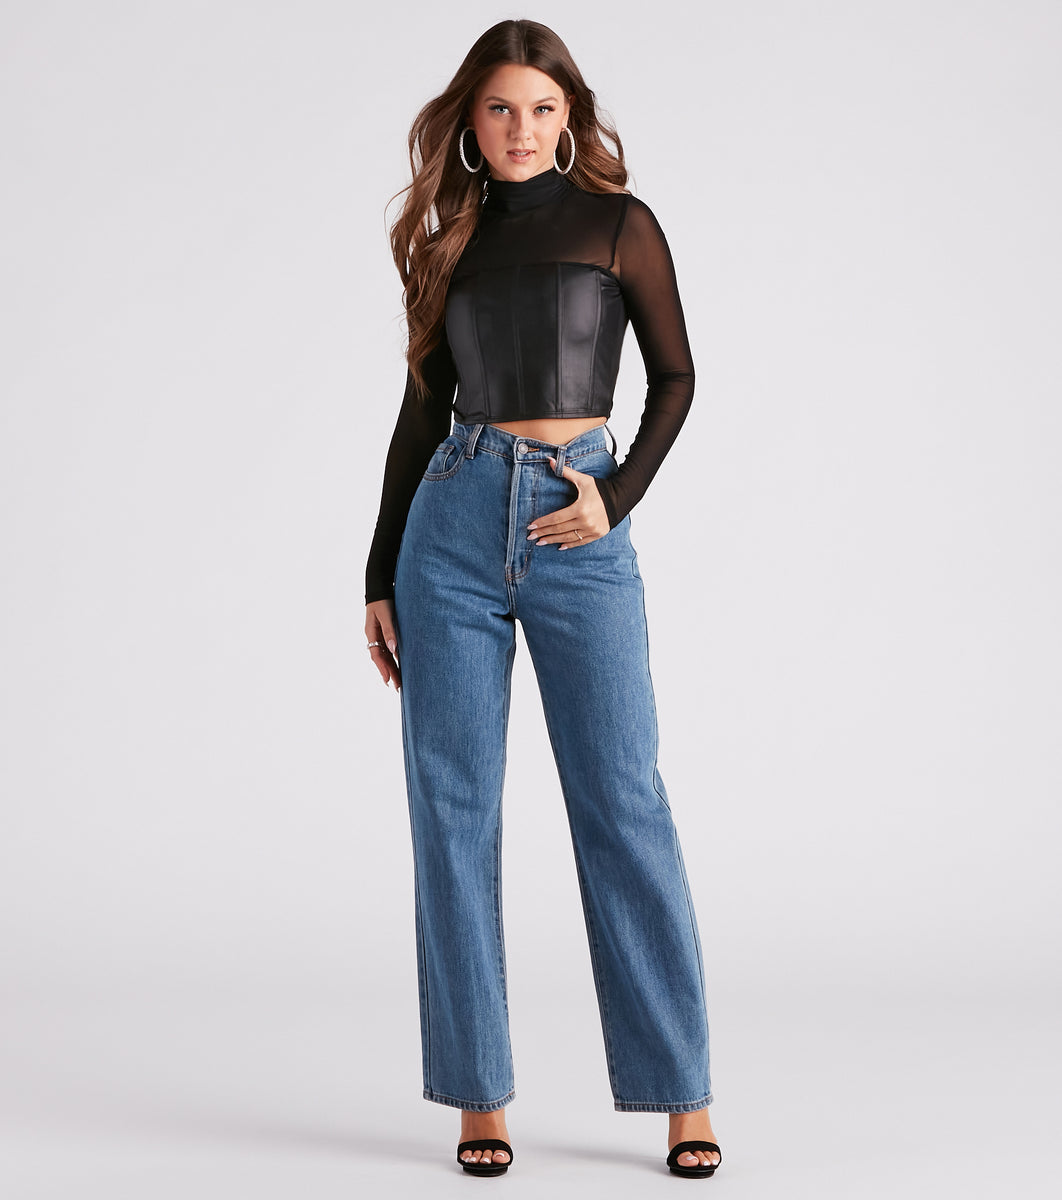 Windsor High Roads Faux Leather Corset Crop Top